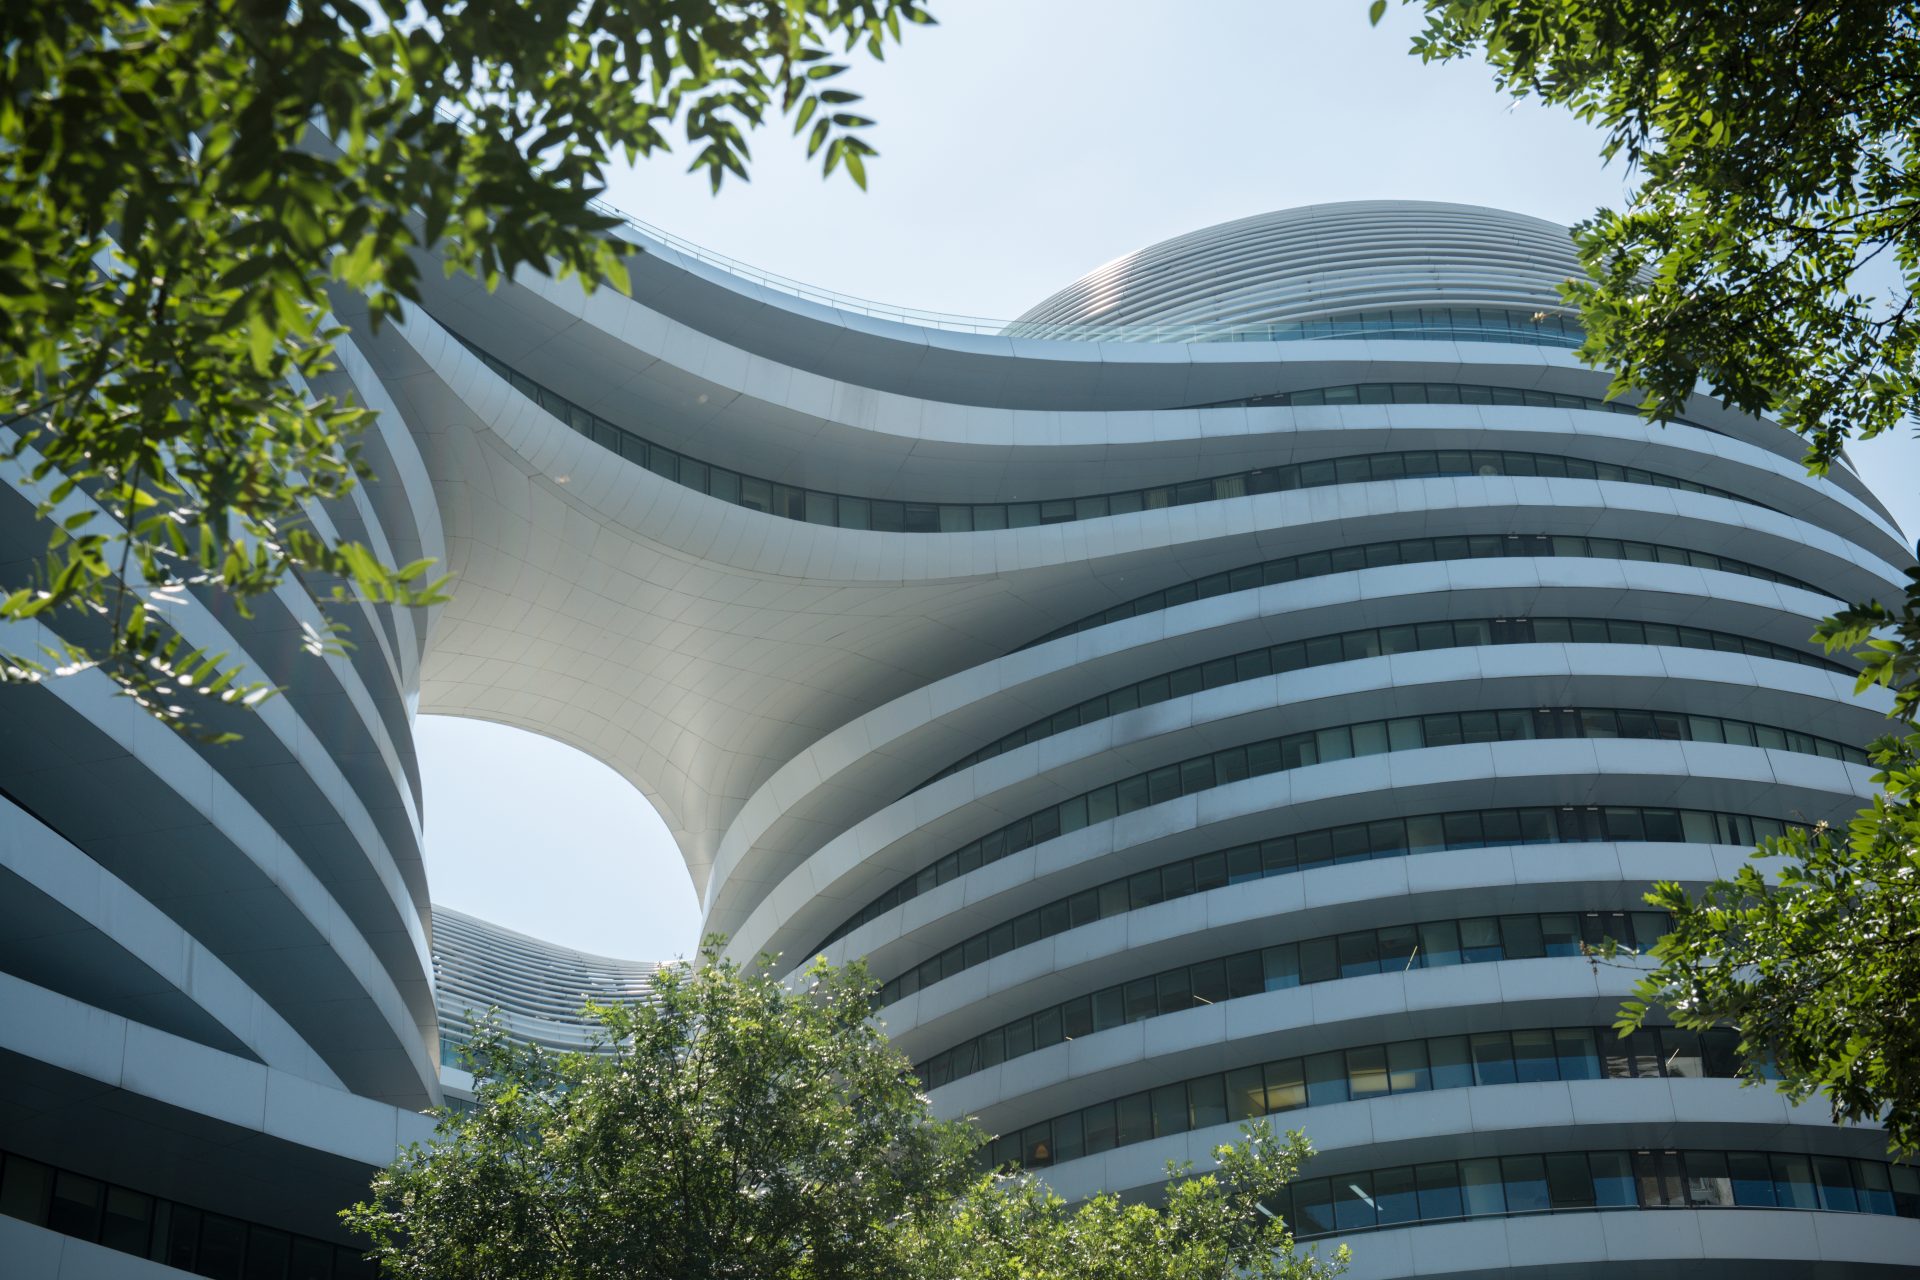 <p>Coexistence with nature can be essential to turn into a positive attitude and restorative happiness. A good example, seen in this image, is the Galaxy Soho building complex in Beijing, China.</p>